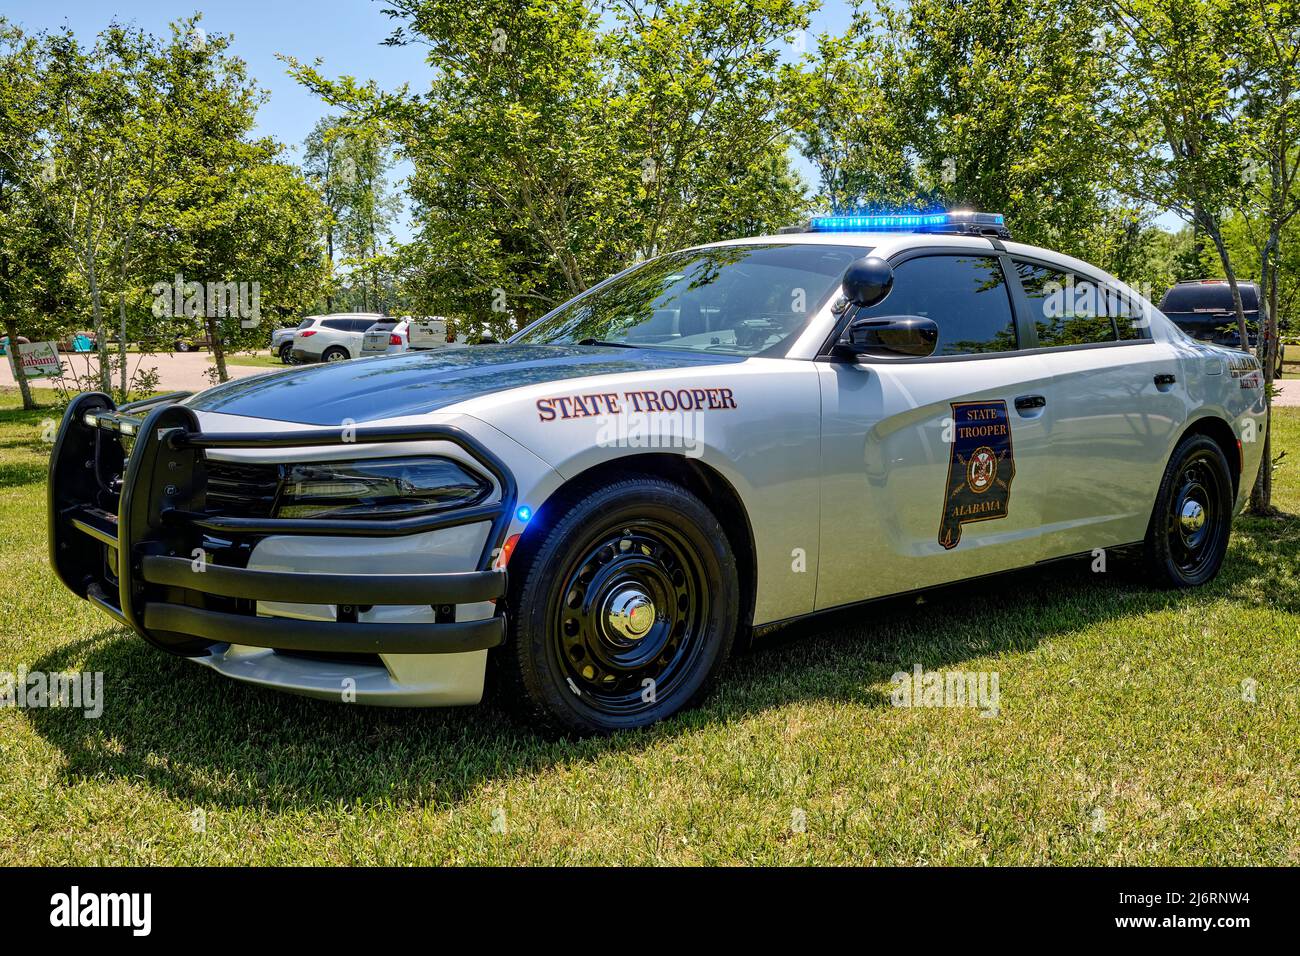 Alabama State Trooper police cruiser or police vehicle, Dodge Charger, on display in Montgomery Alabama, USA. Stock Photo